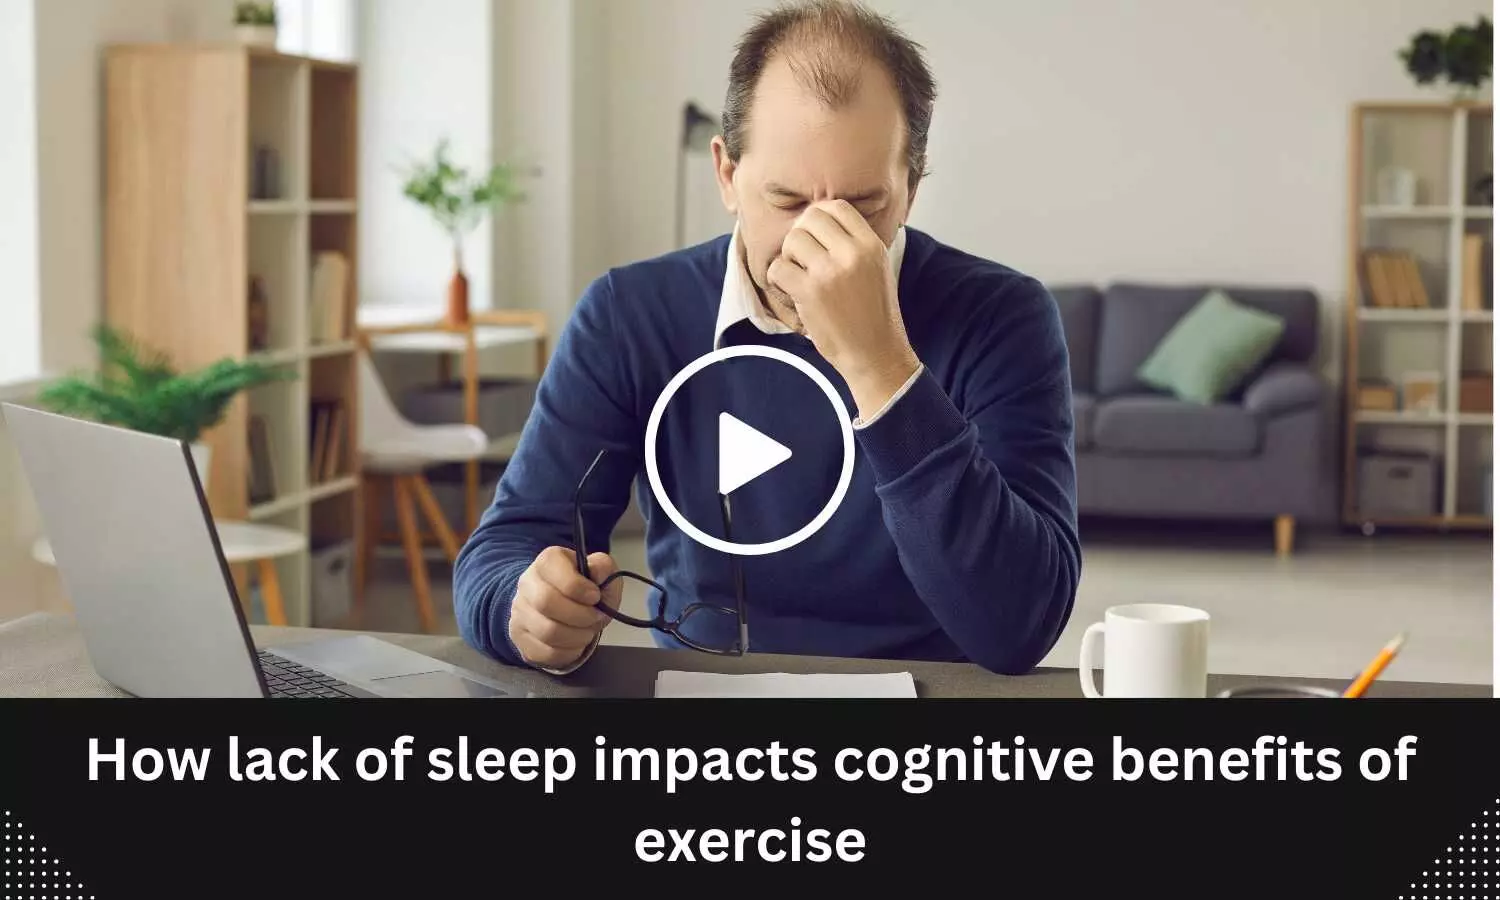 How lack of sleep impacts cognitive benefits of exercise